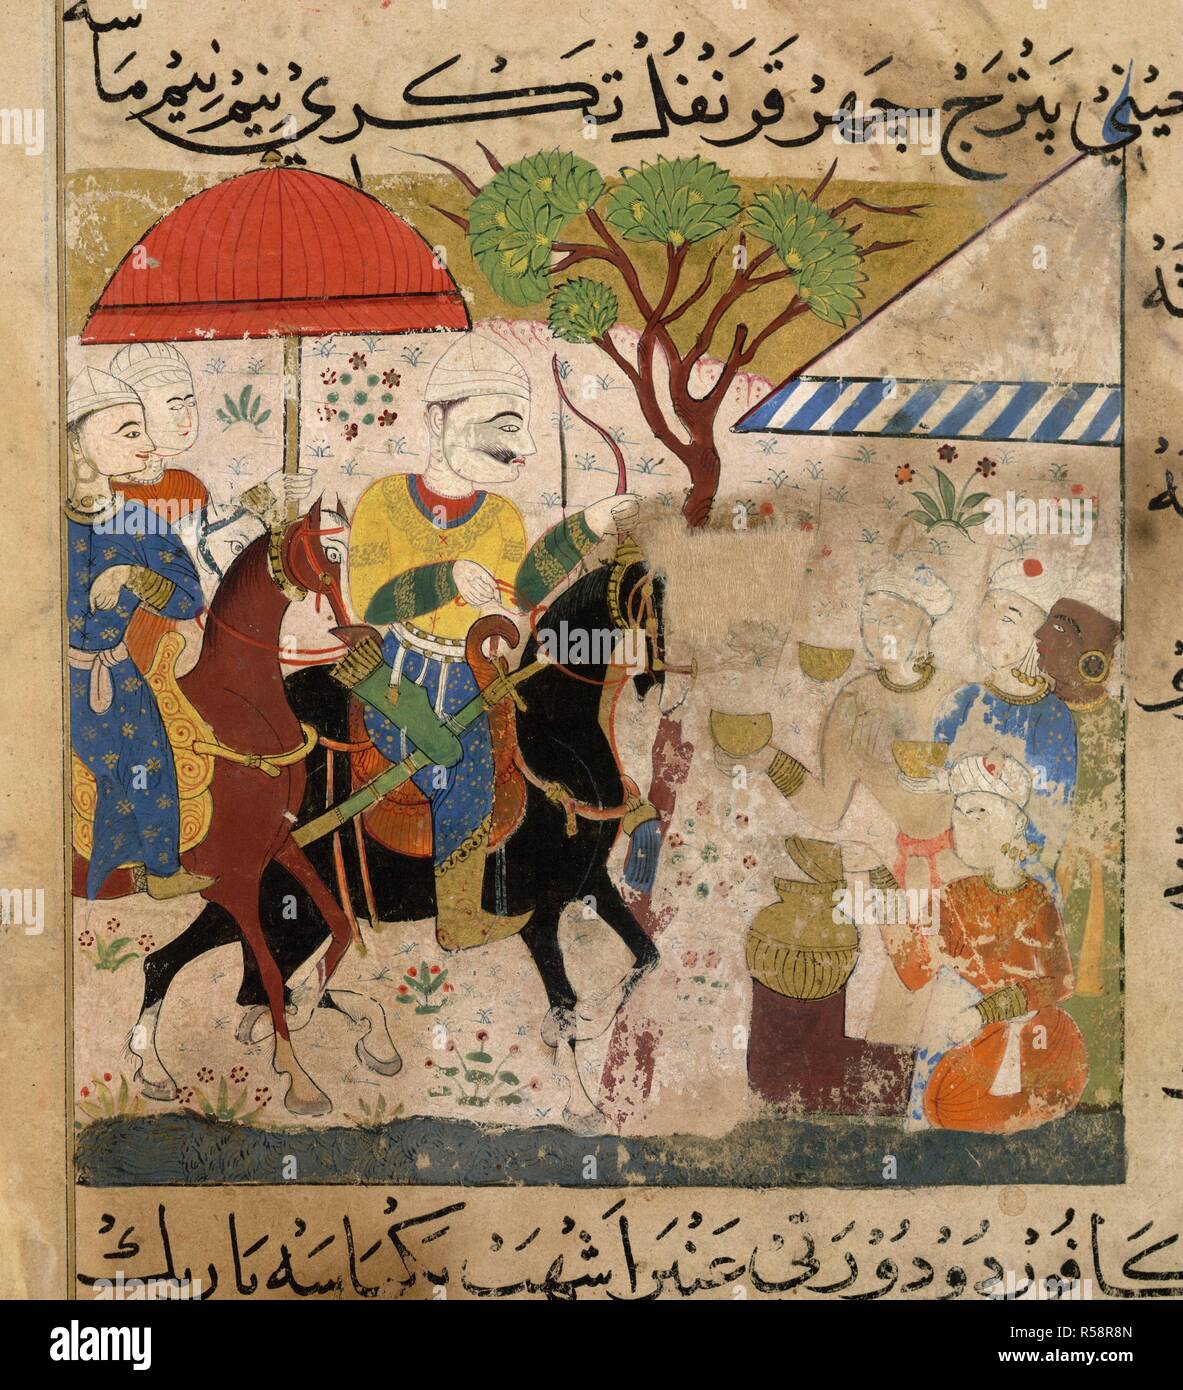 Sultan Ghiyath al-Din. The Ni'matnama-i Nasir al-Din Shah. A manuscript o. 1495 - 1505. Sultan Ghiyath al-Din being offered sherbet while out riding. Opaque watercolour. Sultanate style.  Image taken from The Ni'matnama-i Nasir al-Din Shah. A manuscript on Indian cookery and the preparation of sweetmeats, spices etc.  Originally published/produced in 1495 - 1505. . Source: I.O. ISLAMIC 149, f.177v. Language: Persian. Stock Photo